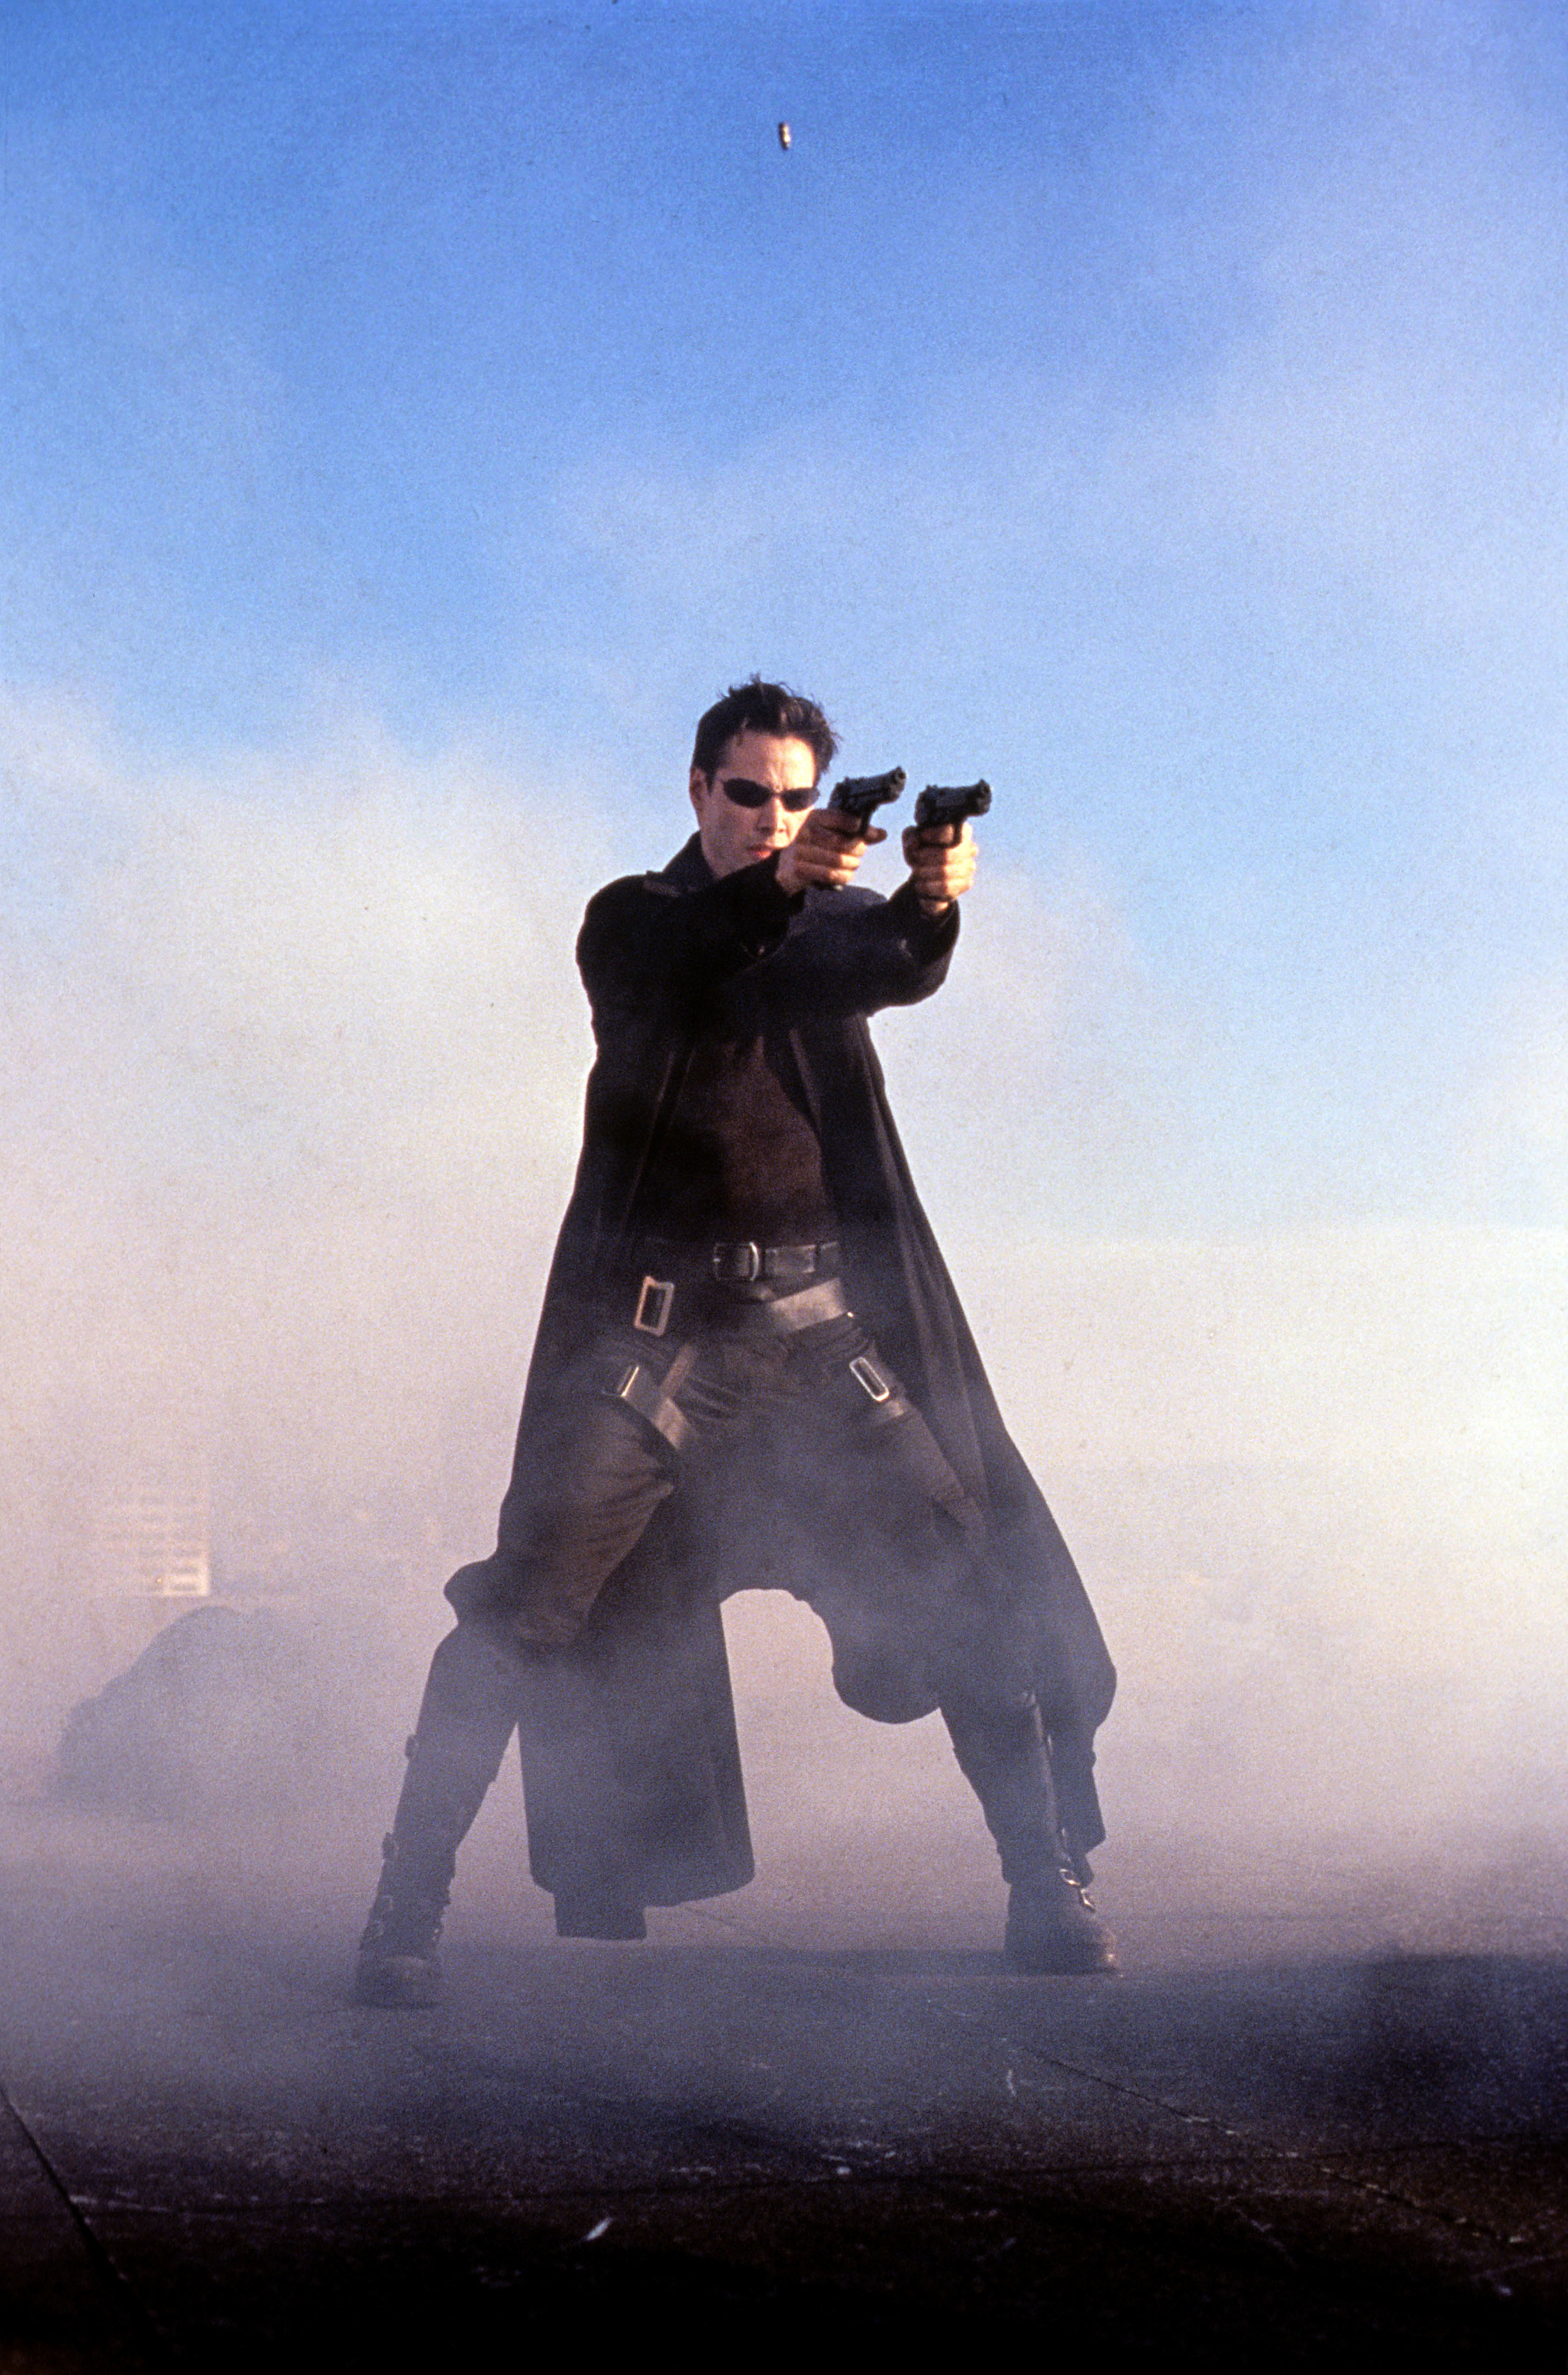 Keanu as Neo in The Matrix holding two guns